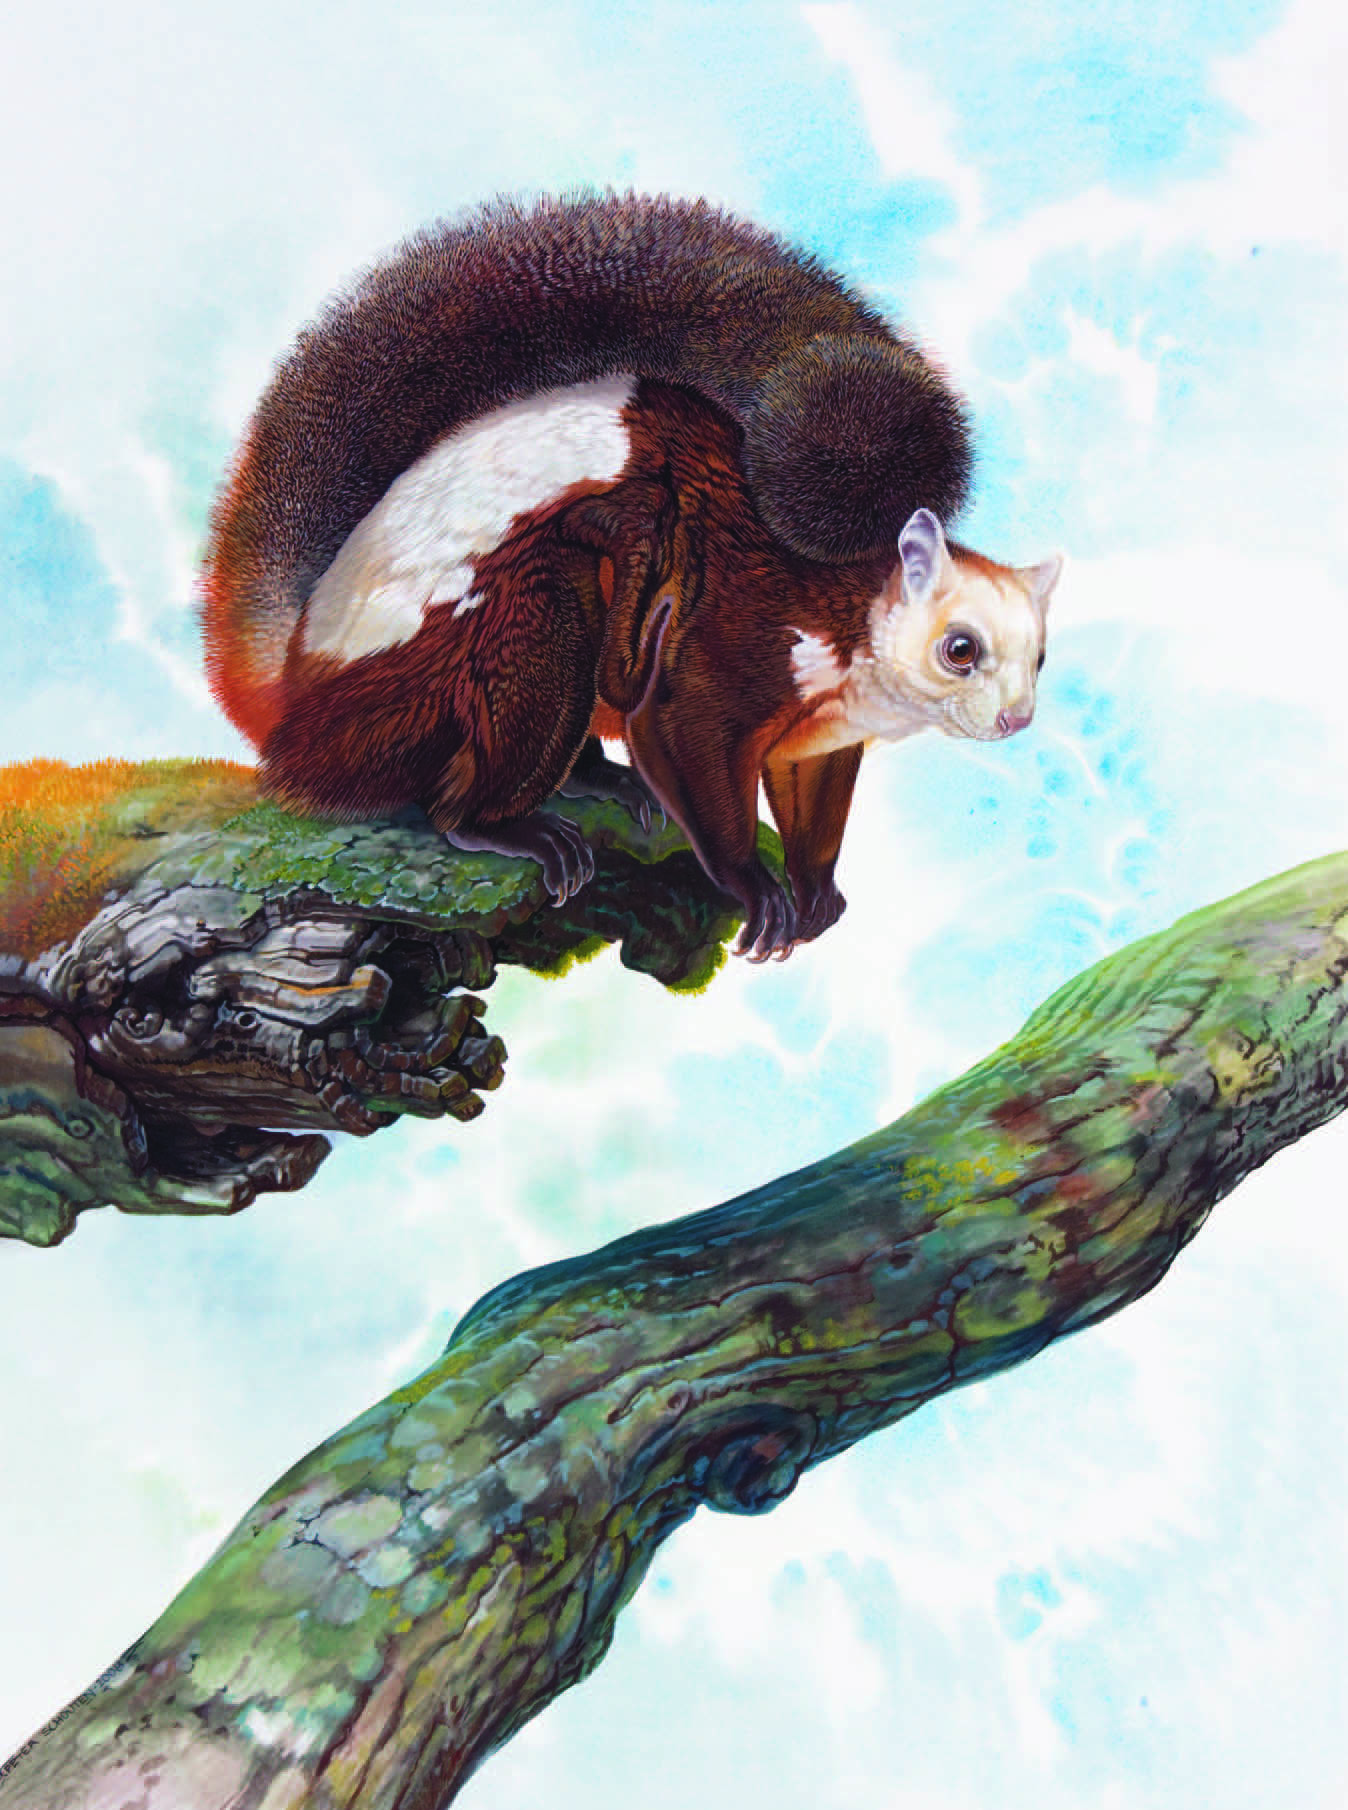 Red and White Giant Flying Squirrel / Petaurista alborufus